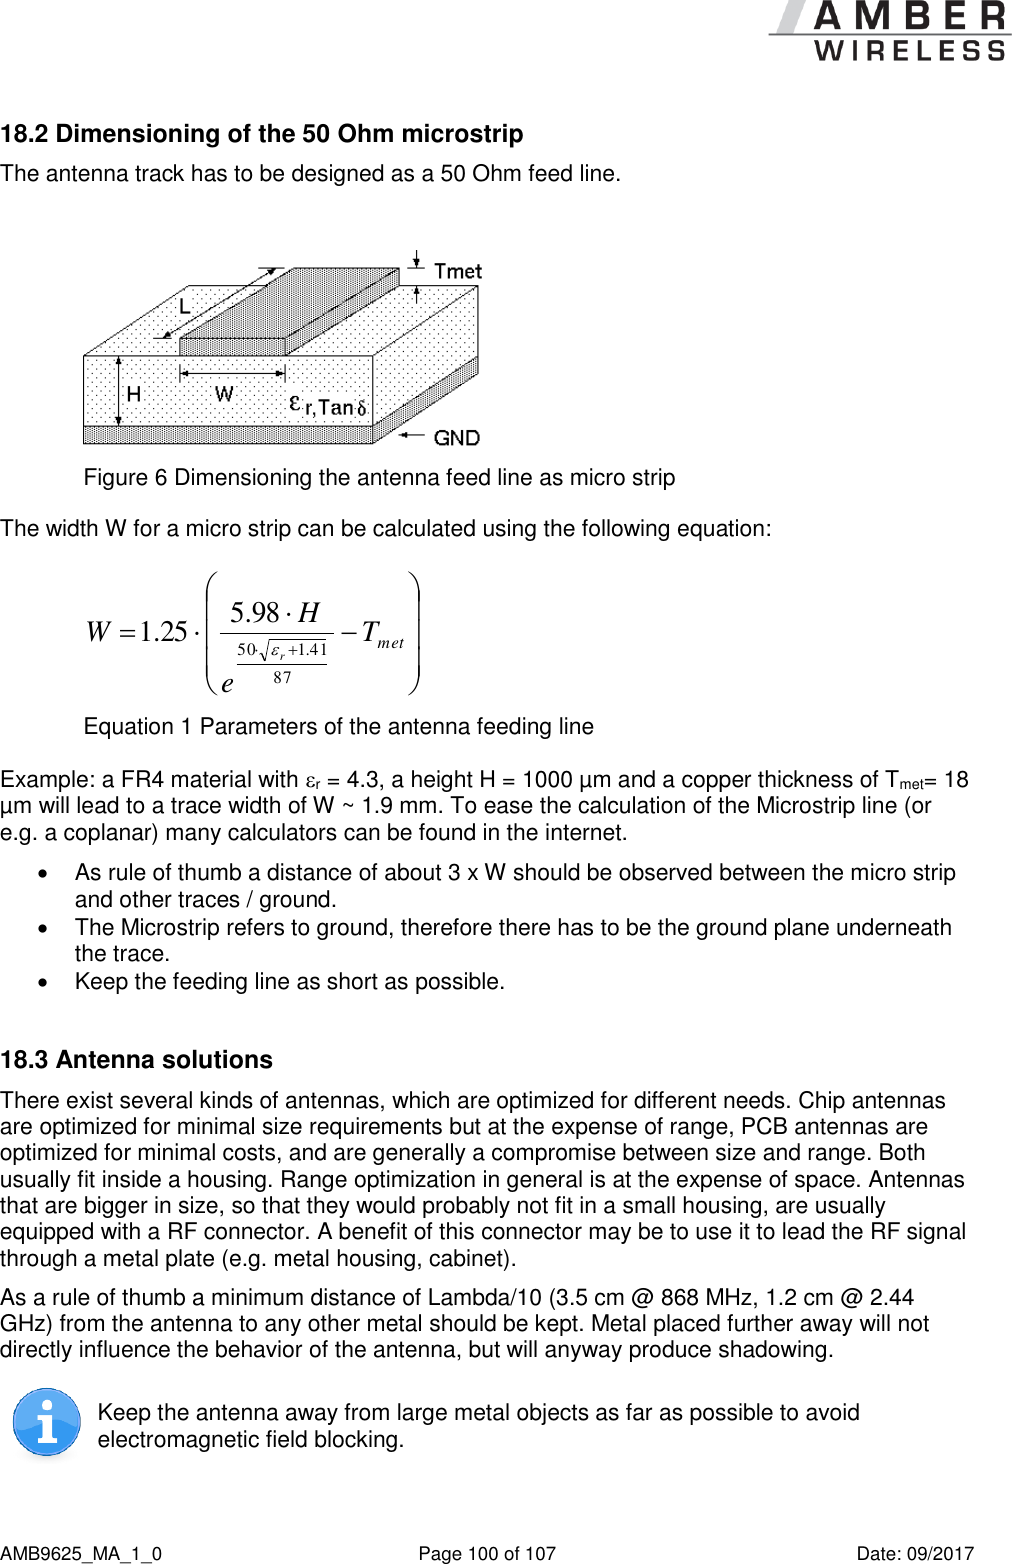      AMB9625_MA_1_0  Page 100 of 107  Date: 09/2017 18.2 Dimensioning of the 50 Ohm microstrip The antenna track has to be designed as a 50 Ohm feed line.   Figure 6 Dimensioning the antenna feed line as micro strip The width W for a micro strip can be calculated using the following equation:   metTeHWr8741.15098.525.1 Equation 1 Parameters of the antenna feeding line Example: a FR4 material with r = 4.3, a height H = 1000 µm and a copper thickness of Tmet= 18 µm will lead to a trace width of W ~ 1.9 mm. To ease the calculation of the Microstrip line (or e.g. a coplanar) many calculators can be found in the internet.    As rule of thumb a distance of about 3 x W should be observed between the micro strip and other traces / ground.   The Microstrip refers to ground, therefore there has to be the ground plane underneath the trace.    Keep the feeding line as short as possible.   18.3 Antenna solutions There exist several kinds of antennas, which are optimized for different needs. Chip antennas are optimized for minimal size requirements but at the expense of range, PCB antennas are optimized for minimal costs, and are generally a compromise between size and range. Both usually fit inside a housing. Range optimization in general is at the expense of space. Antennas that are bigger in size, so that they would probably not fit in a small housing, are usually equipped with a RF connector. A benefit of this connector may be to use it to lead the RF signal through a metal plate (e.g. metal housing, cabinet).  As a rule of thumb a minimum distance of Lambda/10 (3.5 cm @ 868 MHz, 1.2 cm @ 2.44 GHz) from the antenna to any other metal should be kept. Metal placed further away will not directly influence the behavior of the antenna, but will anyway produce shadowing.   Keep the antenna away from large metal objects as far as possible to avoid electromagnetic field blocking.  